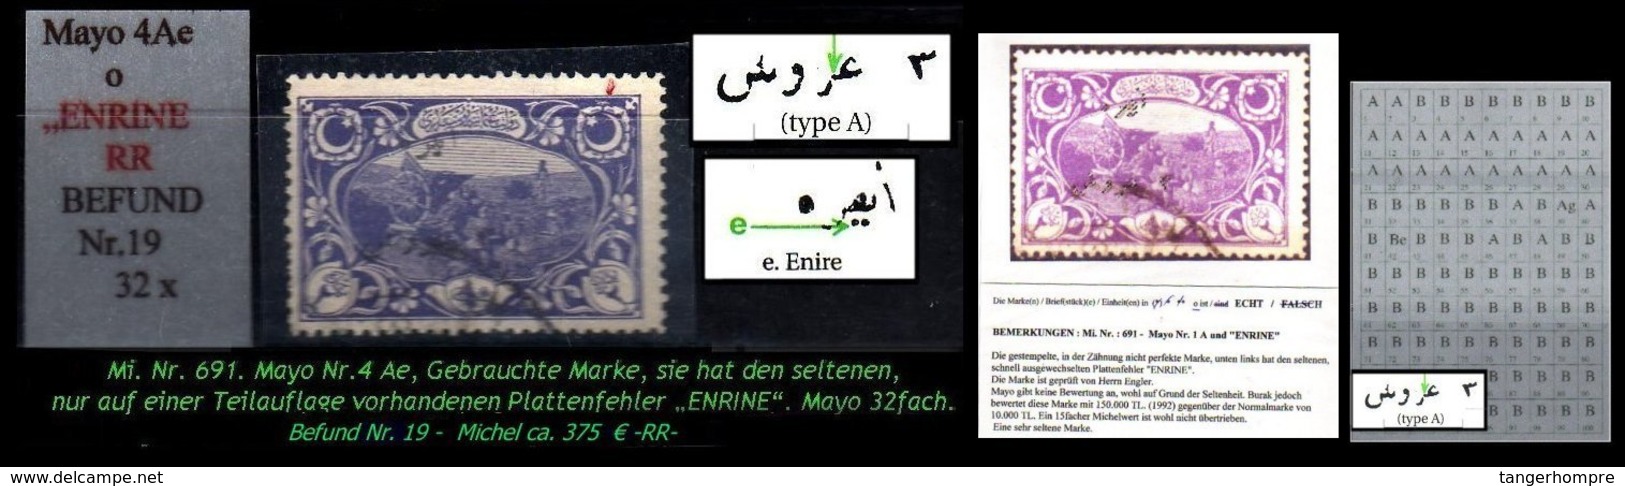 TURKEY ,EARLY OTTOMAN SPECIALIZED FOR SPECIALIST, SEE...Mi. Nr. 691 Type B - Plattenfehler -RRR- - 1920-21 Anatolia